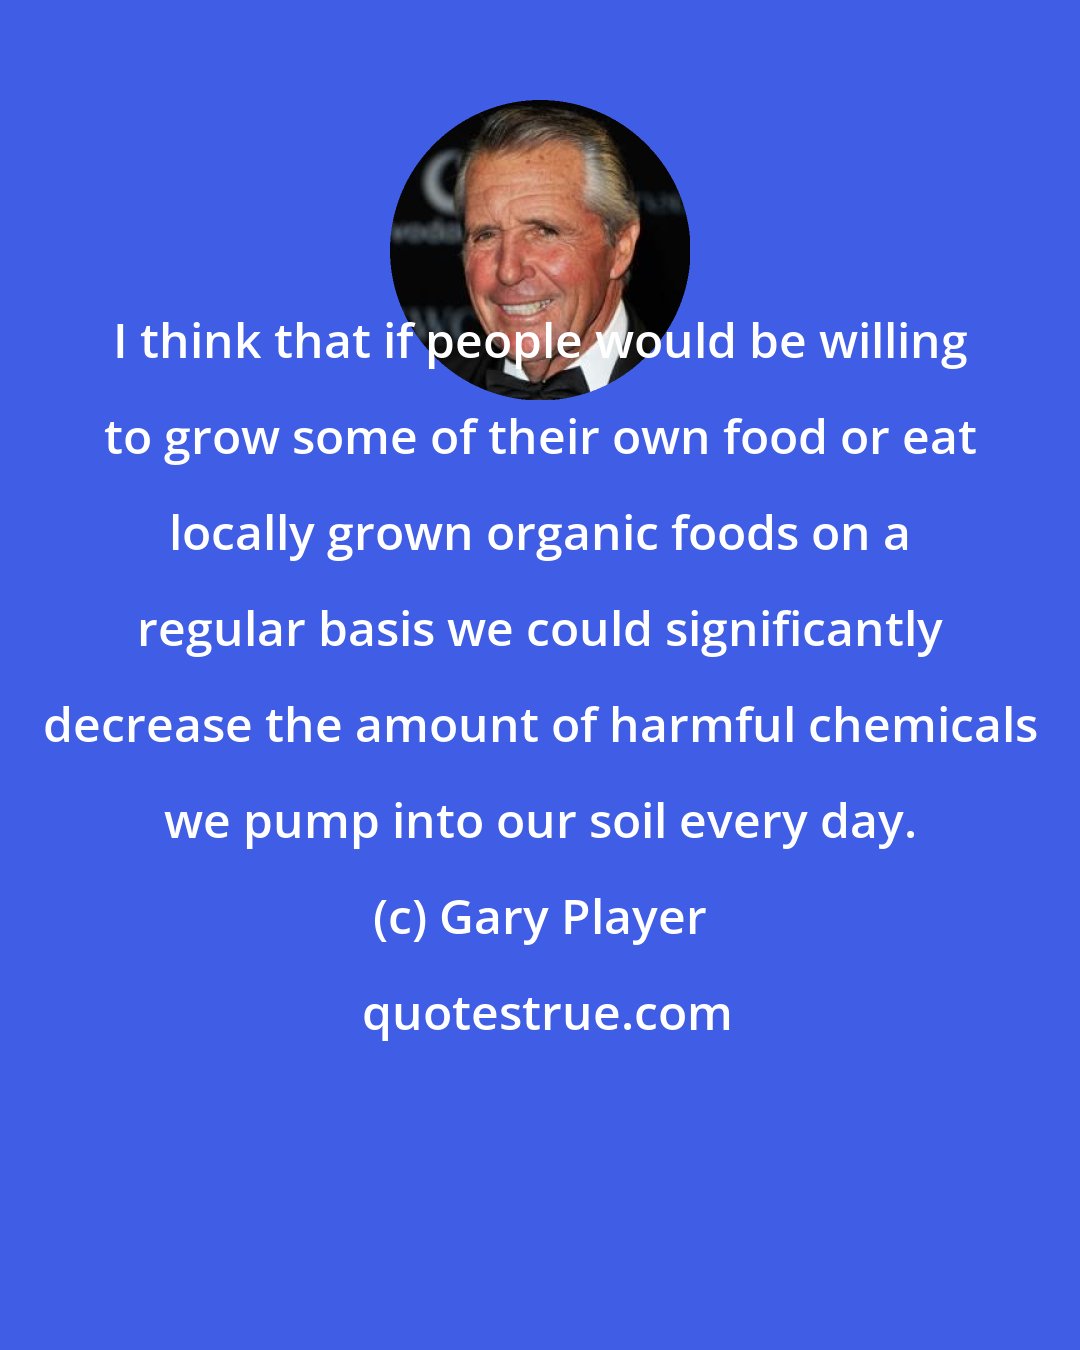 Gary Player: I think that if people would be willing to grow some of their own food or eat locally grown organic foods on a regular basis we could significantly decrease the amount of harmful chemicals we pump into our soil every day.